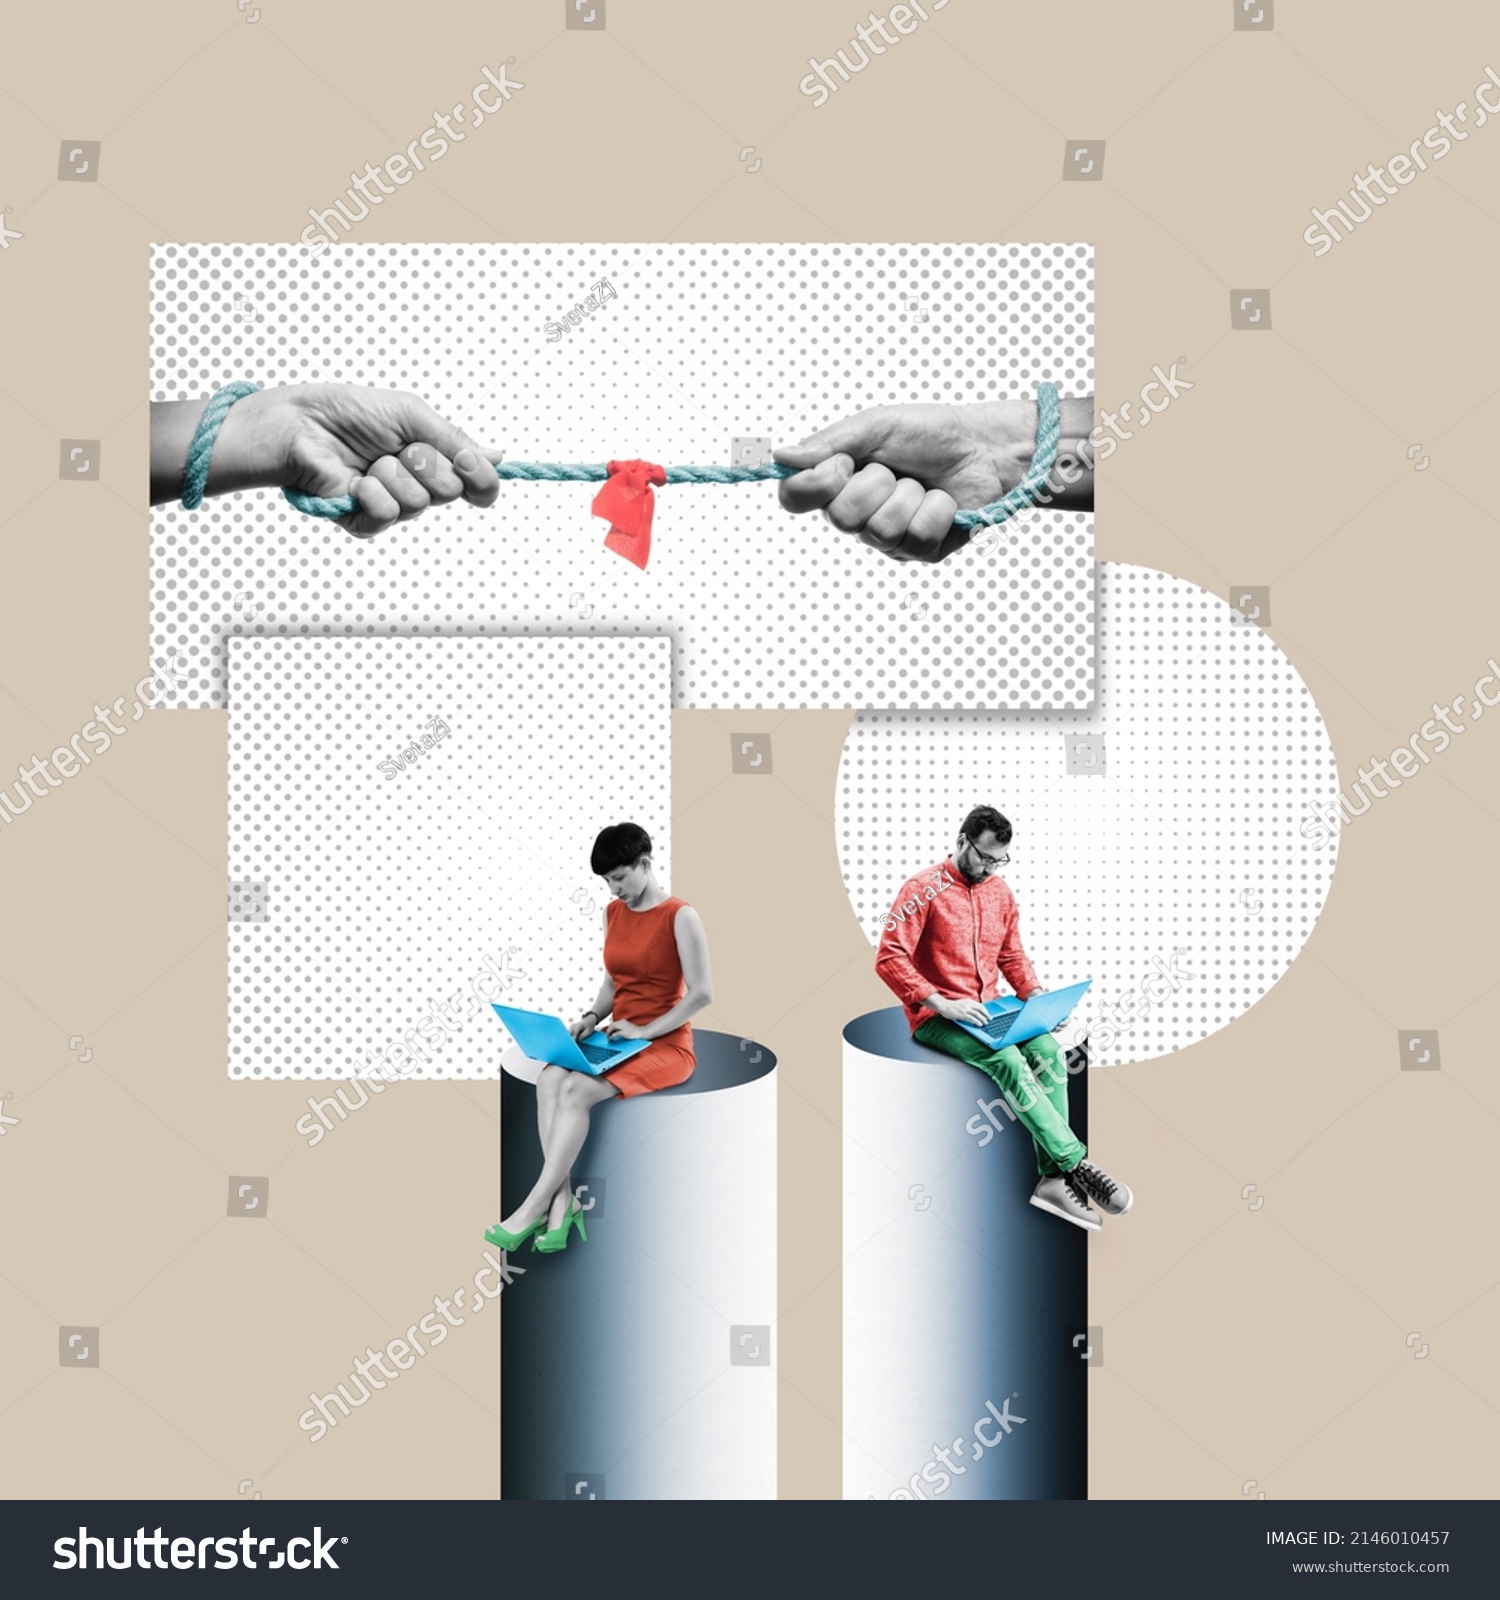 Competition between a man and a woman, gender equality. Art collage. #2146010457